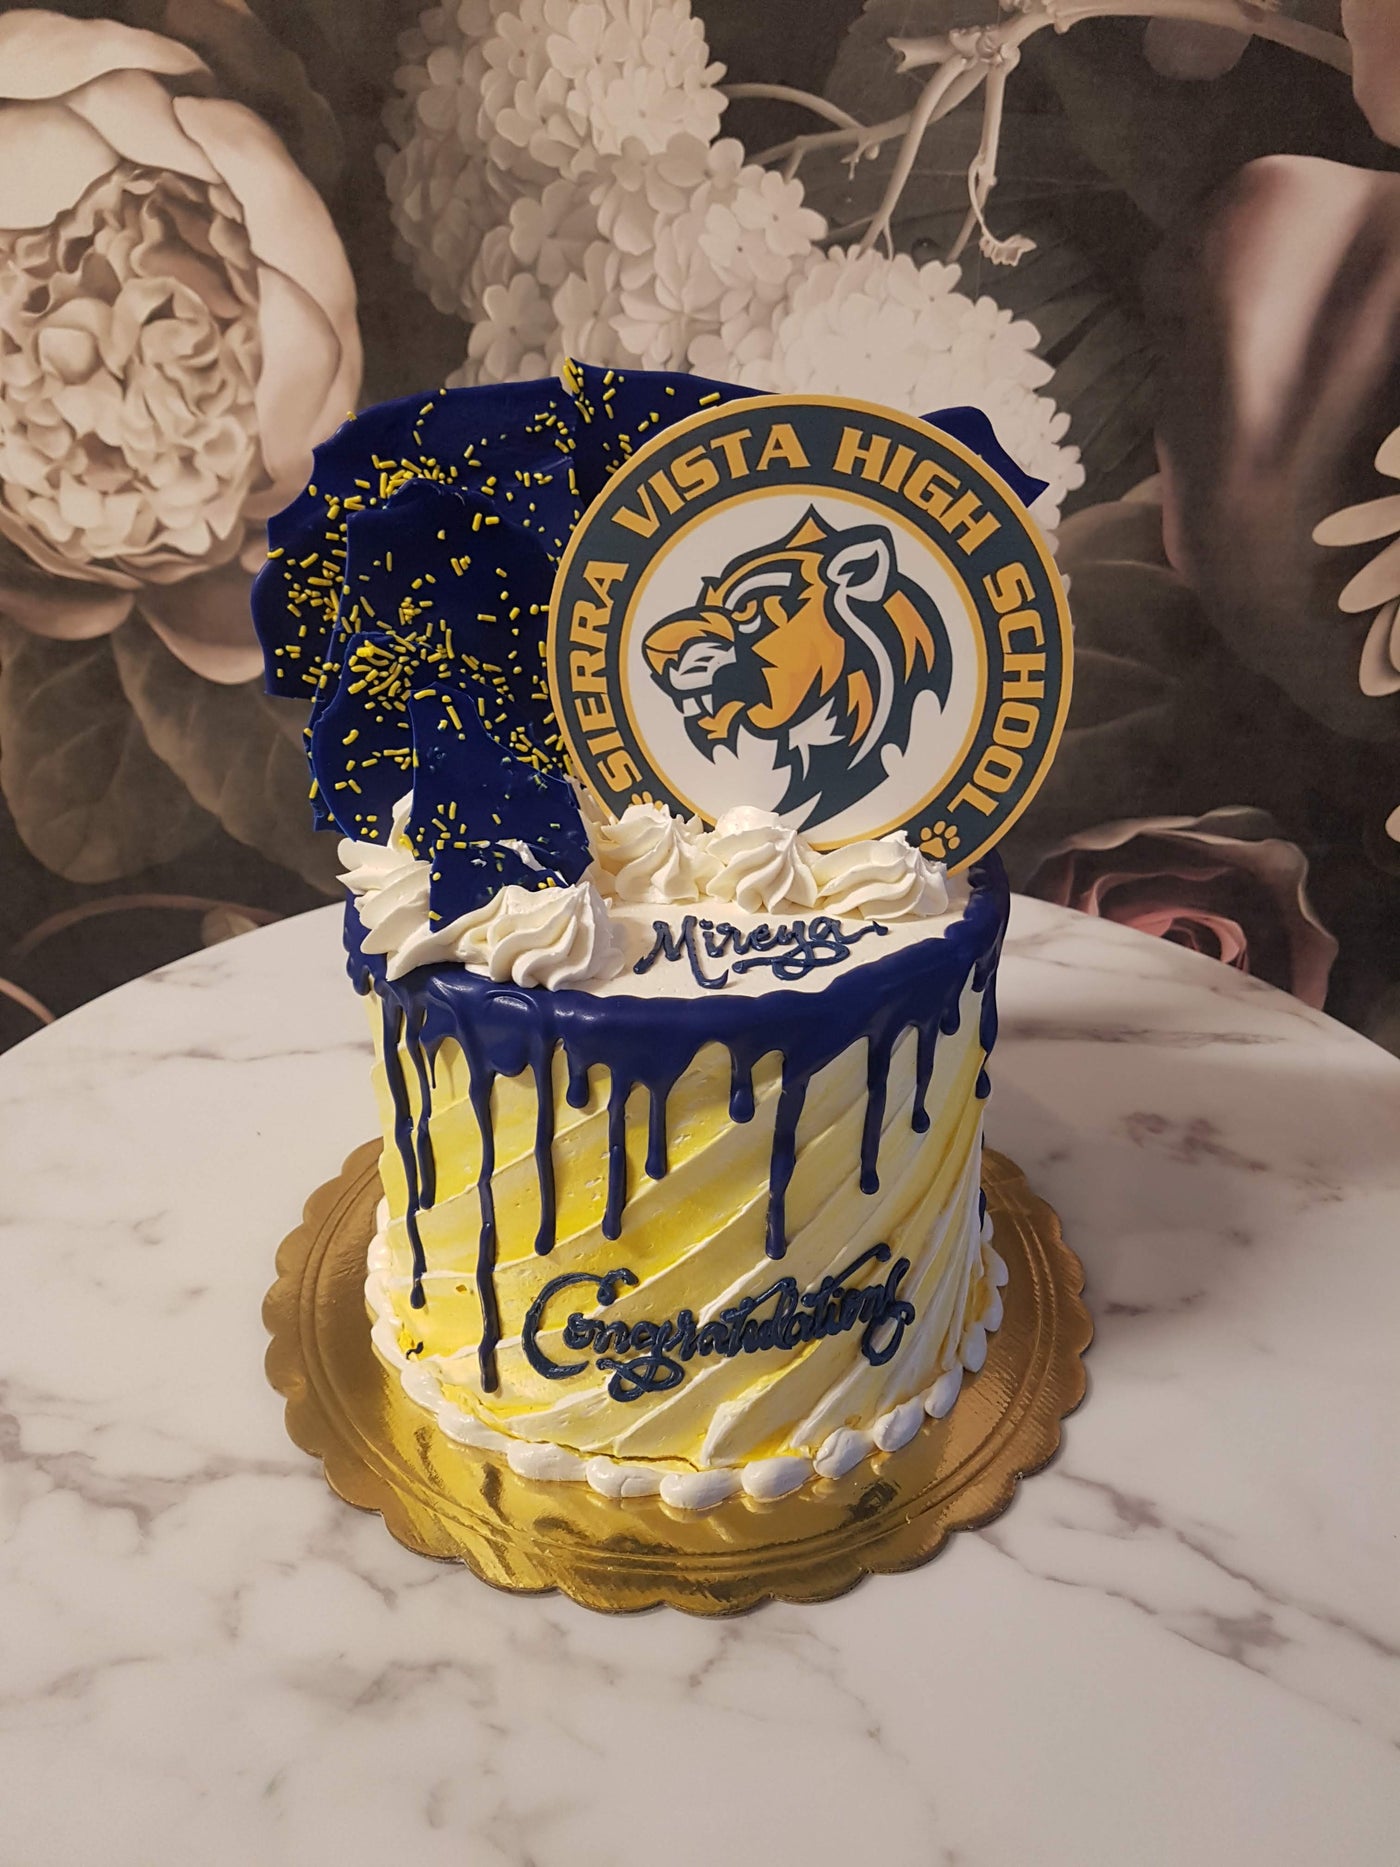 50+ Upscale Graduation Cake Ideas For Your Big Day